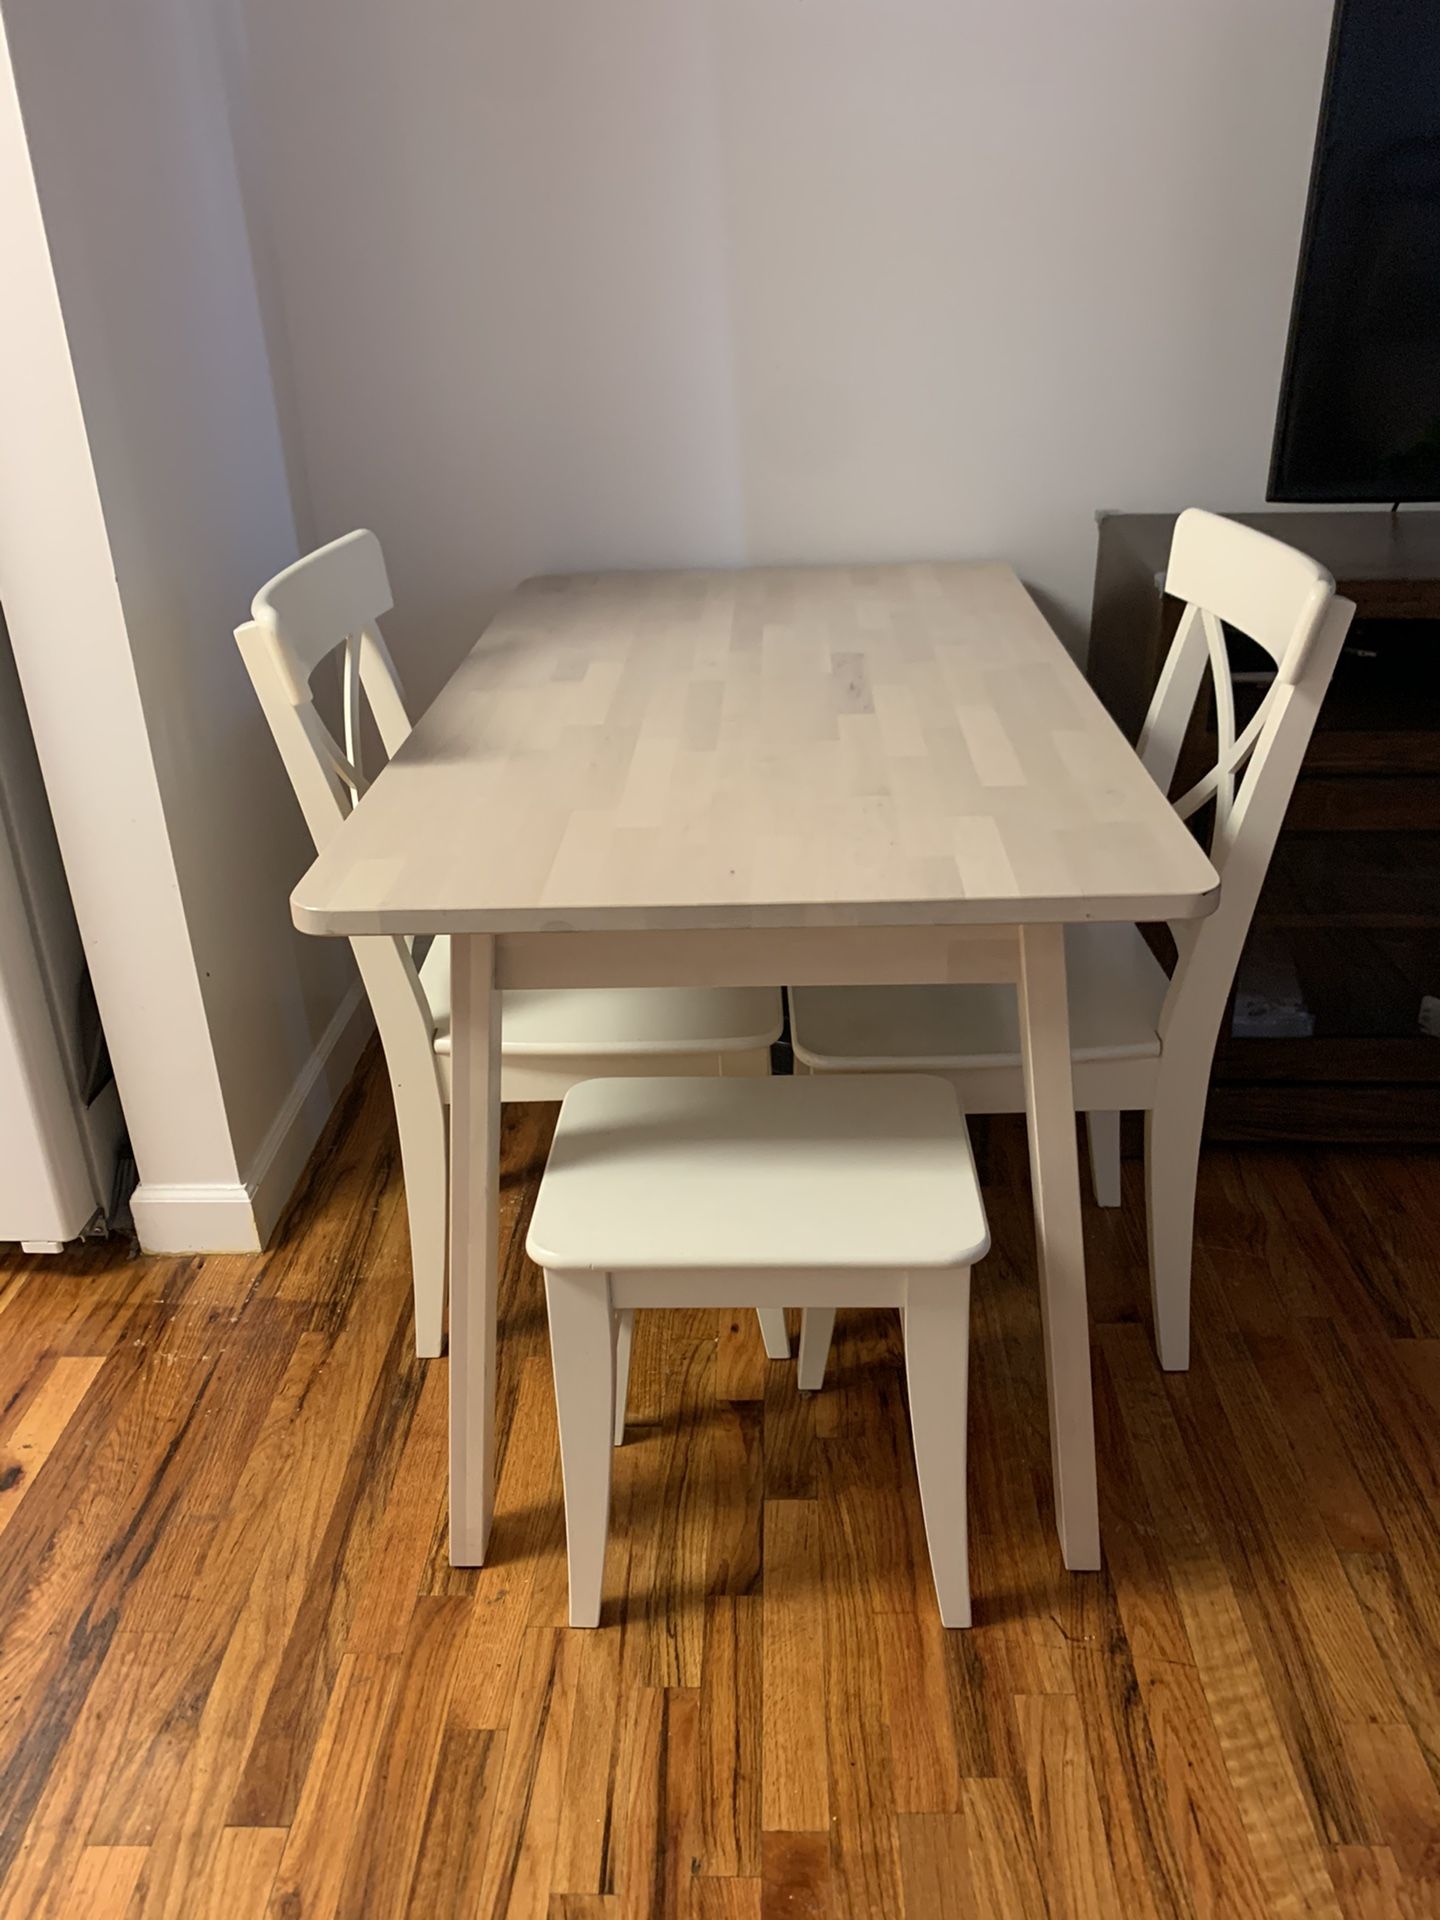 IKEA dining table plus 2 chairs and 2 stools